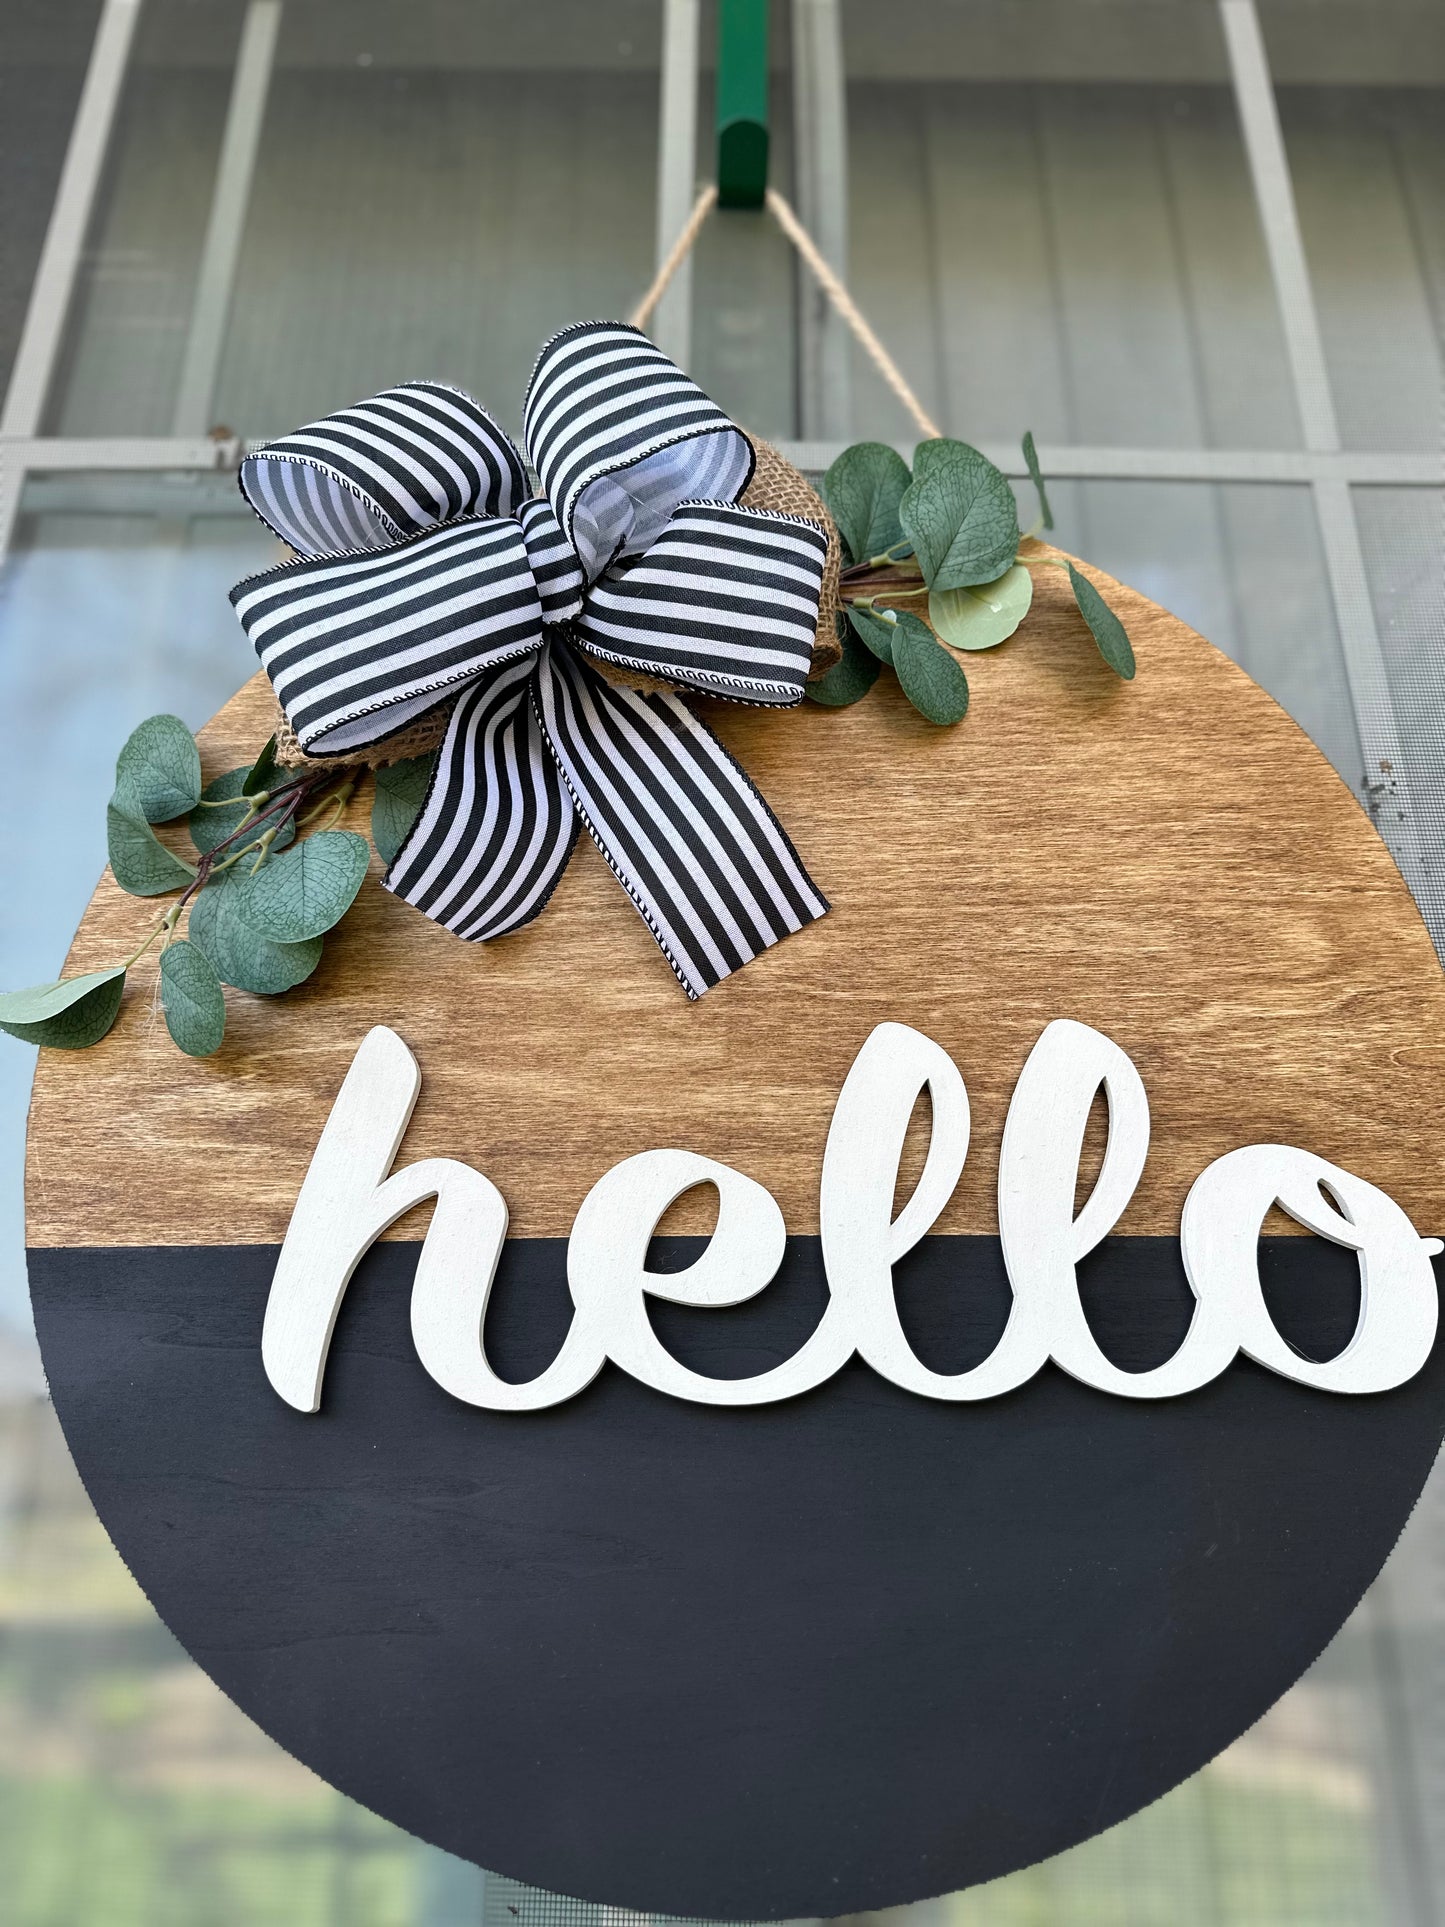 19” Hello Wood Stained Door Hanger - Striped Magnetic Bow